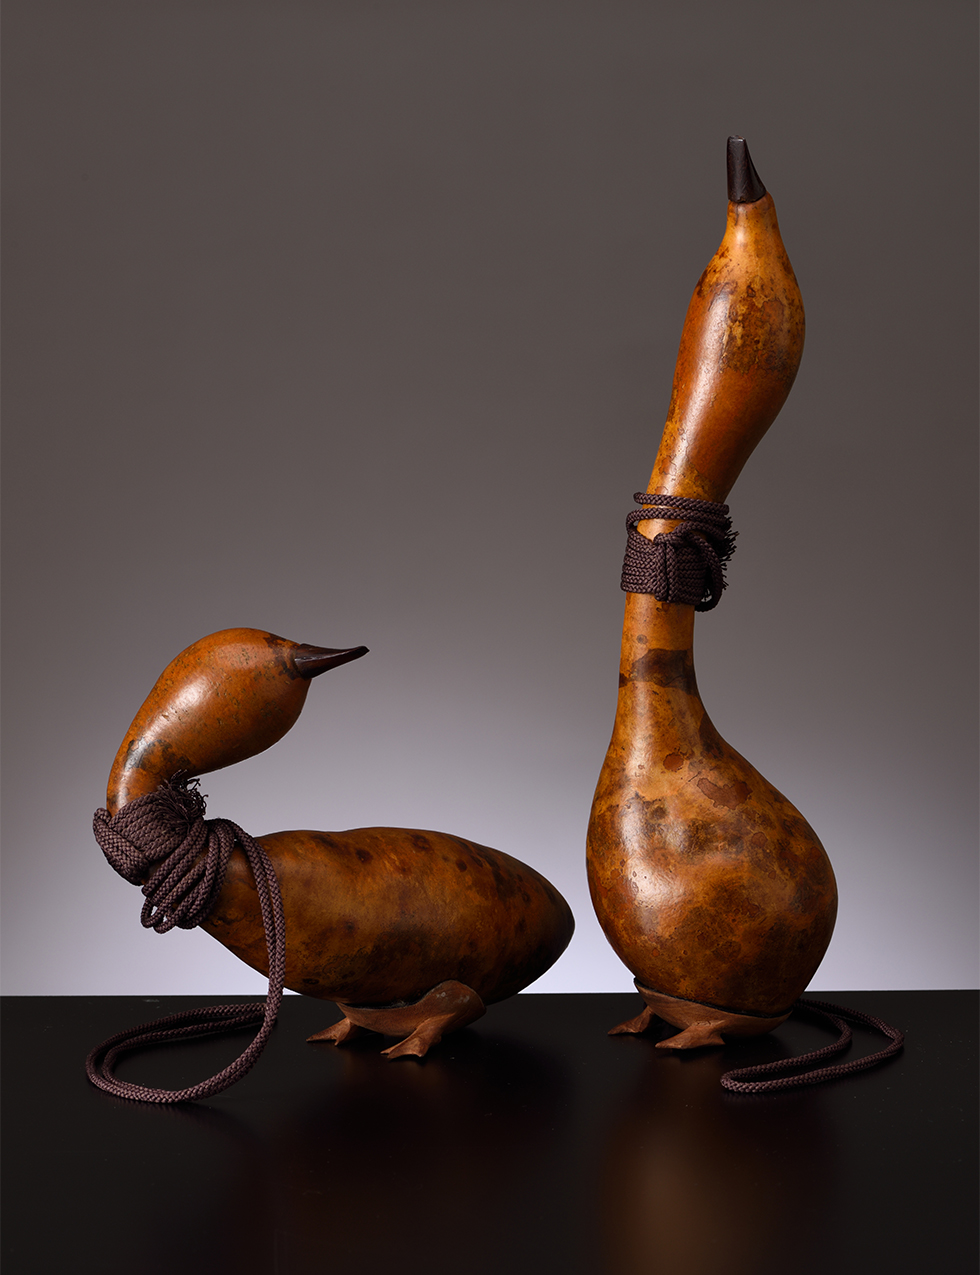 “A pair of geese made of gourd” by Tomioka Tessai (1836–1924)